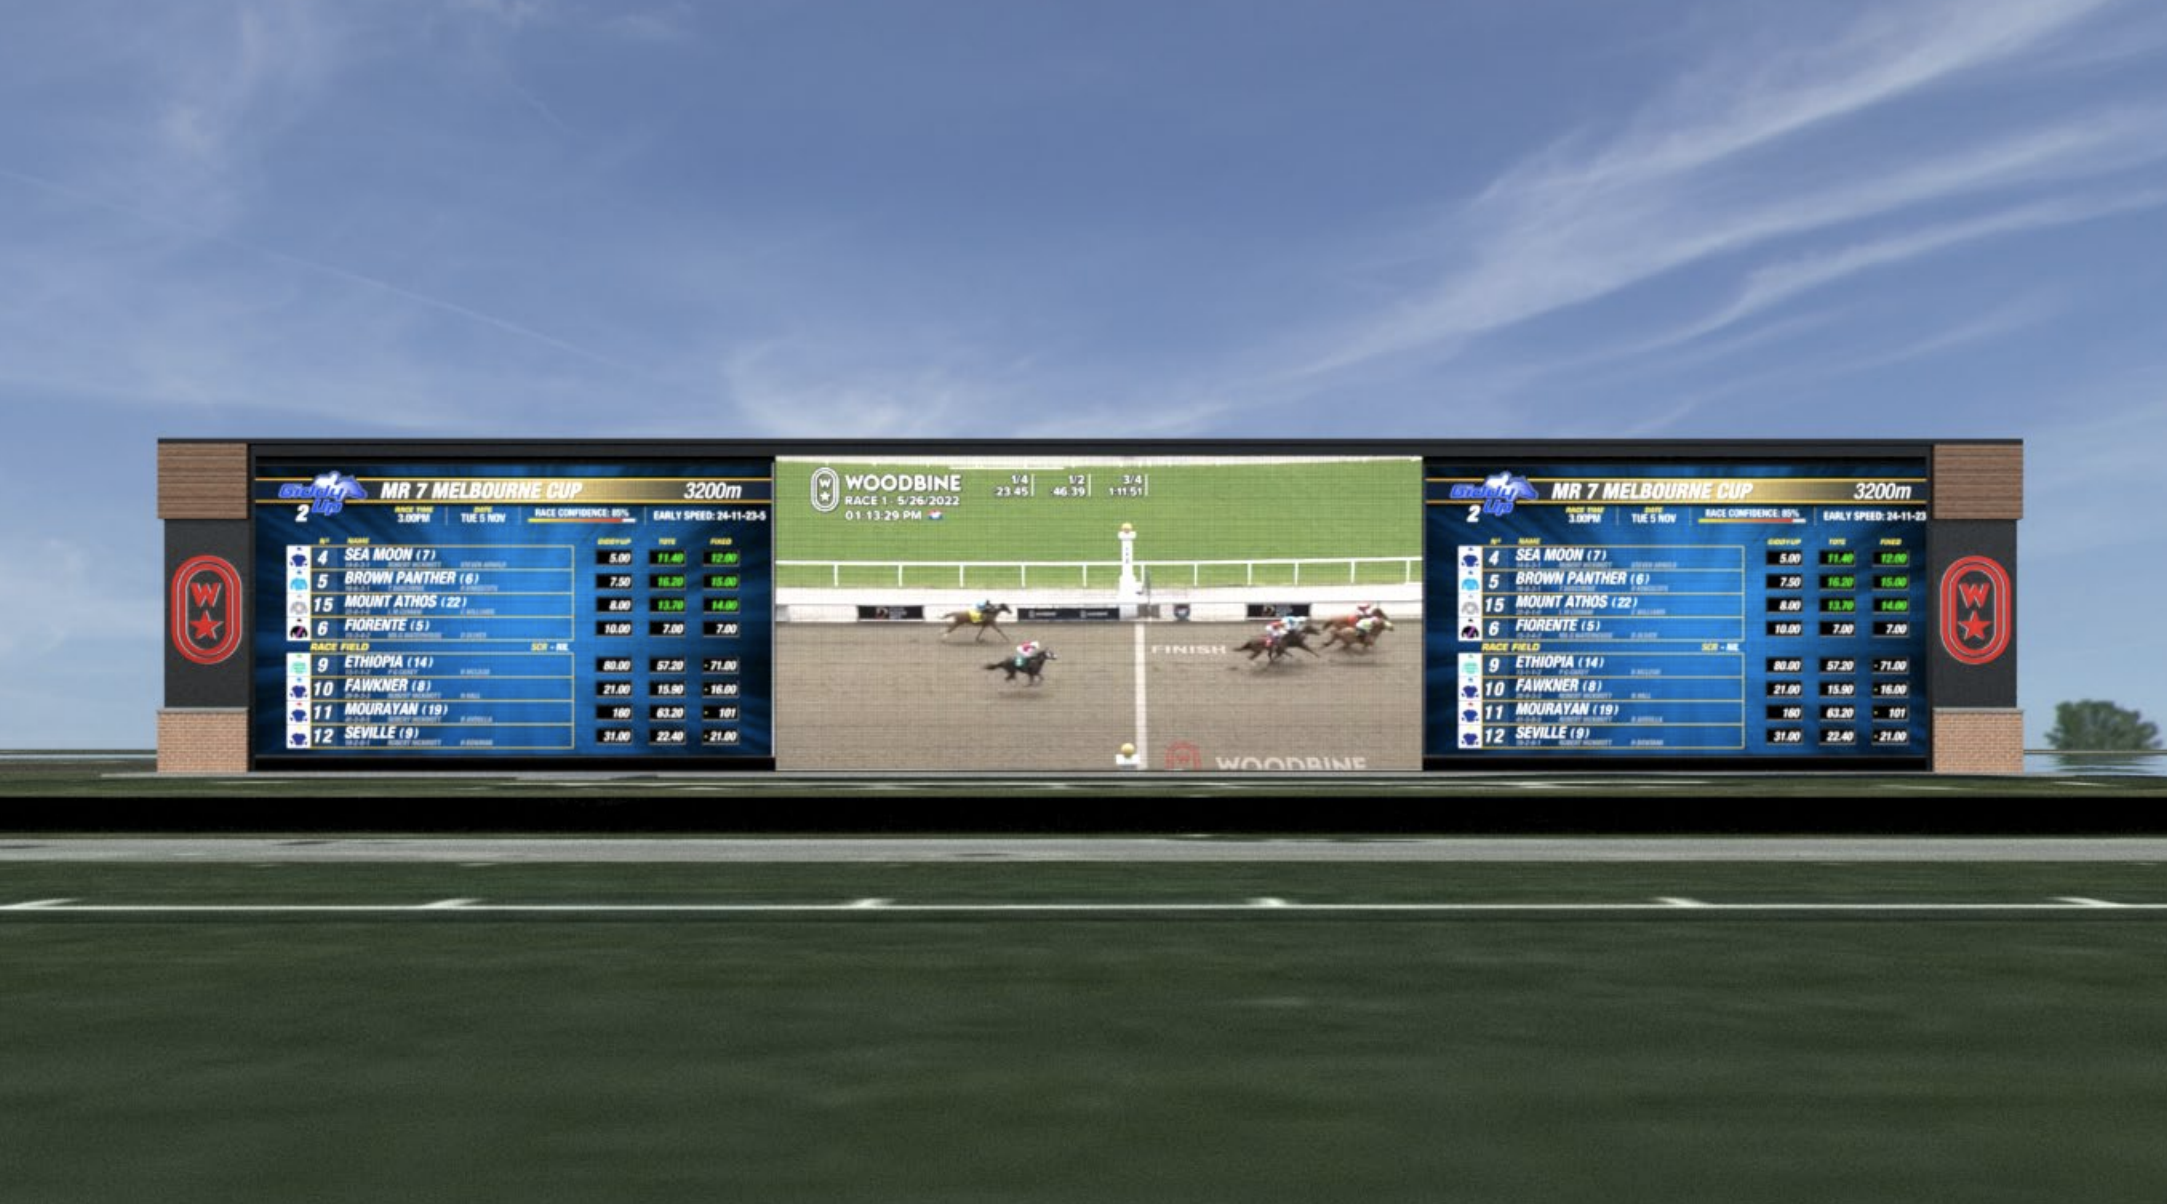 Rendering of the new infield video board at Woodbine Racetrack.